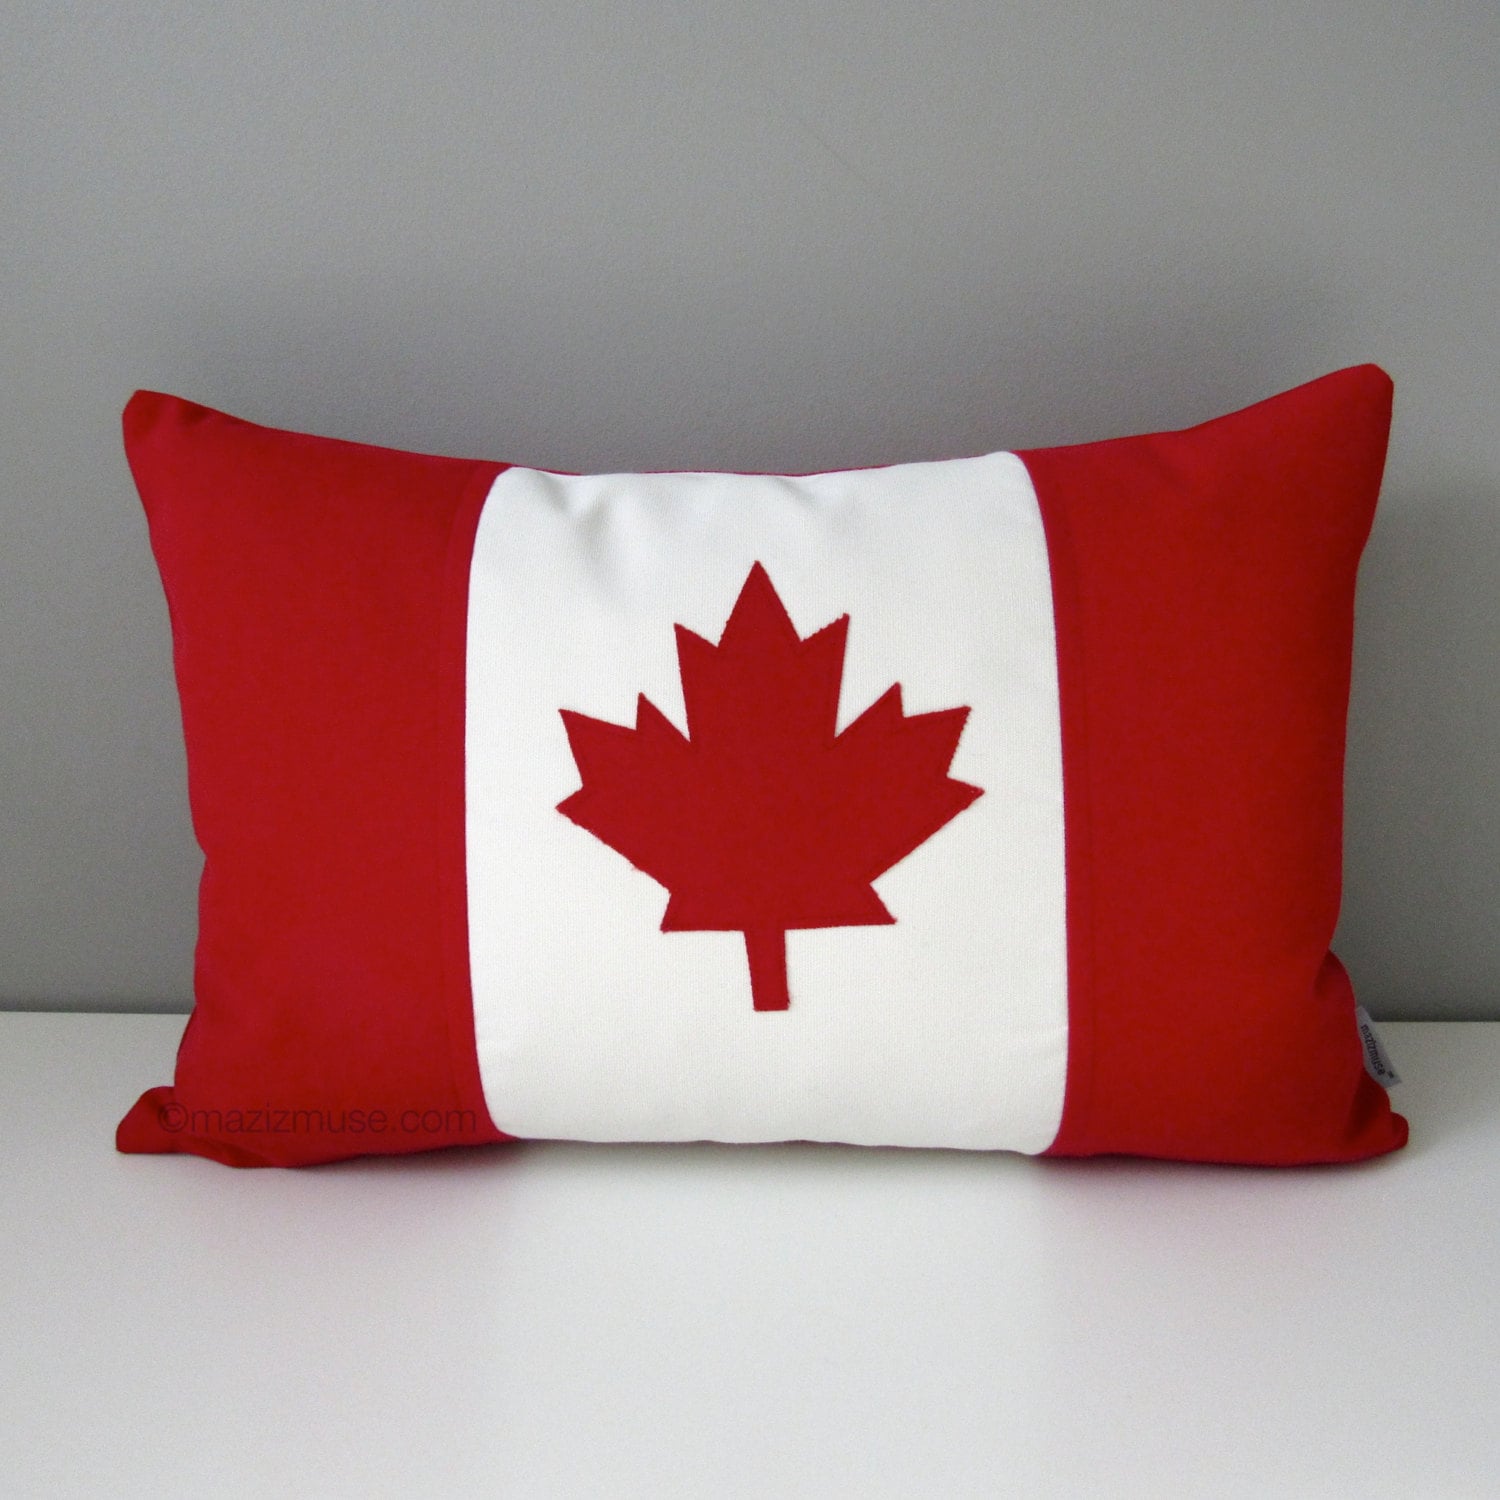 Canada Canadian Vintage Style Flag Oblong Woven Tapestry Cushion Cover 